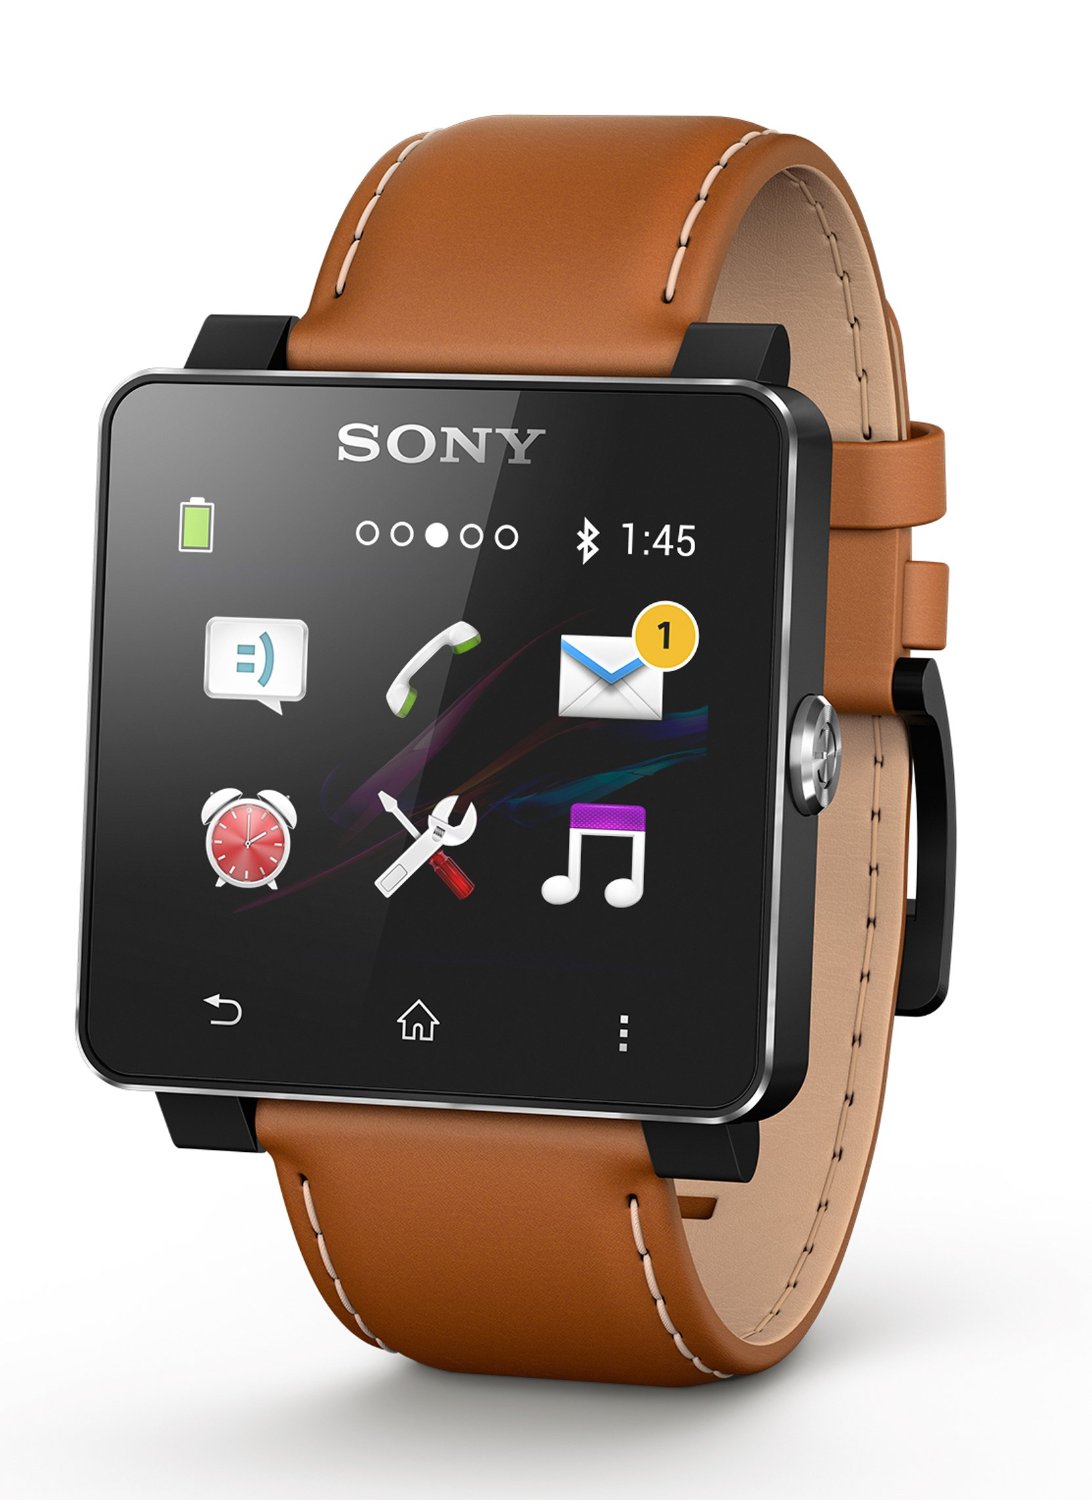 Sony Smart Watch Review | Is This Smart Watch Worth Buying?